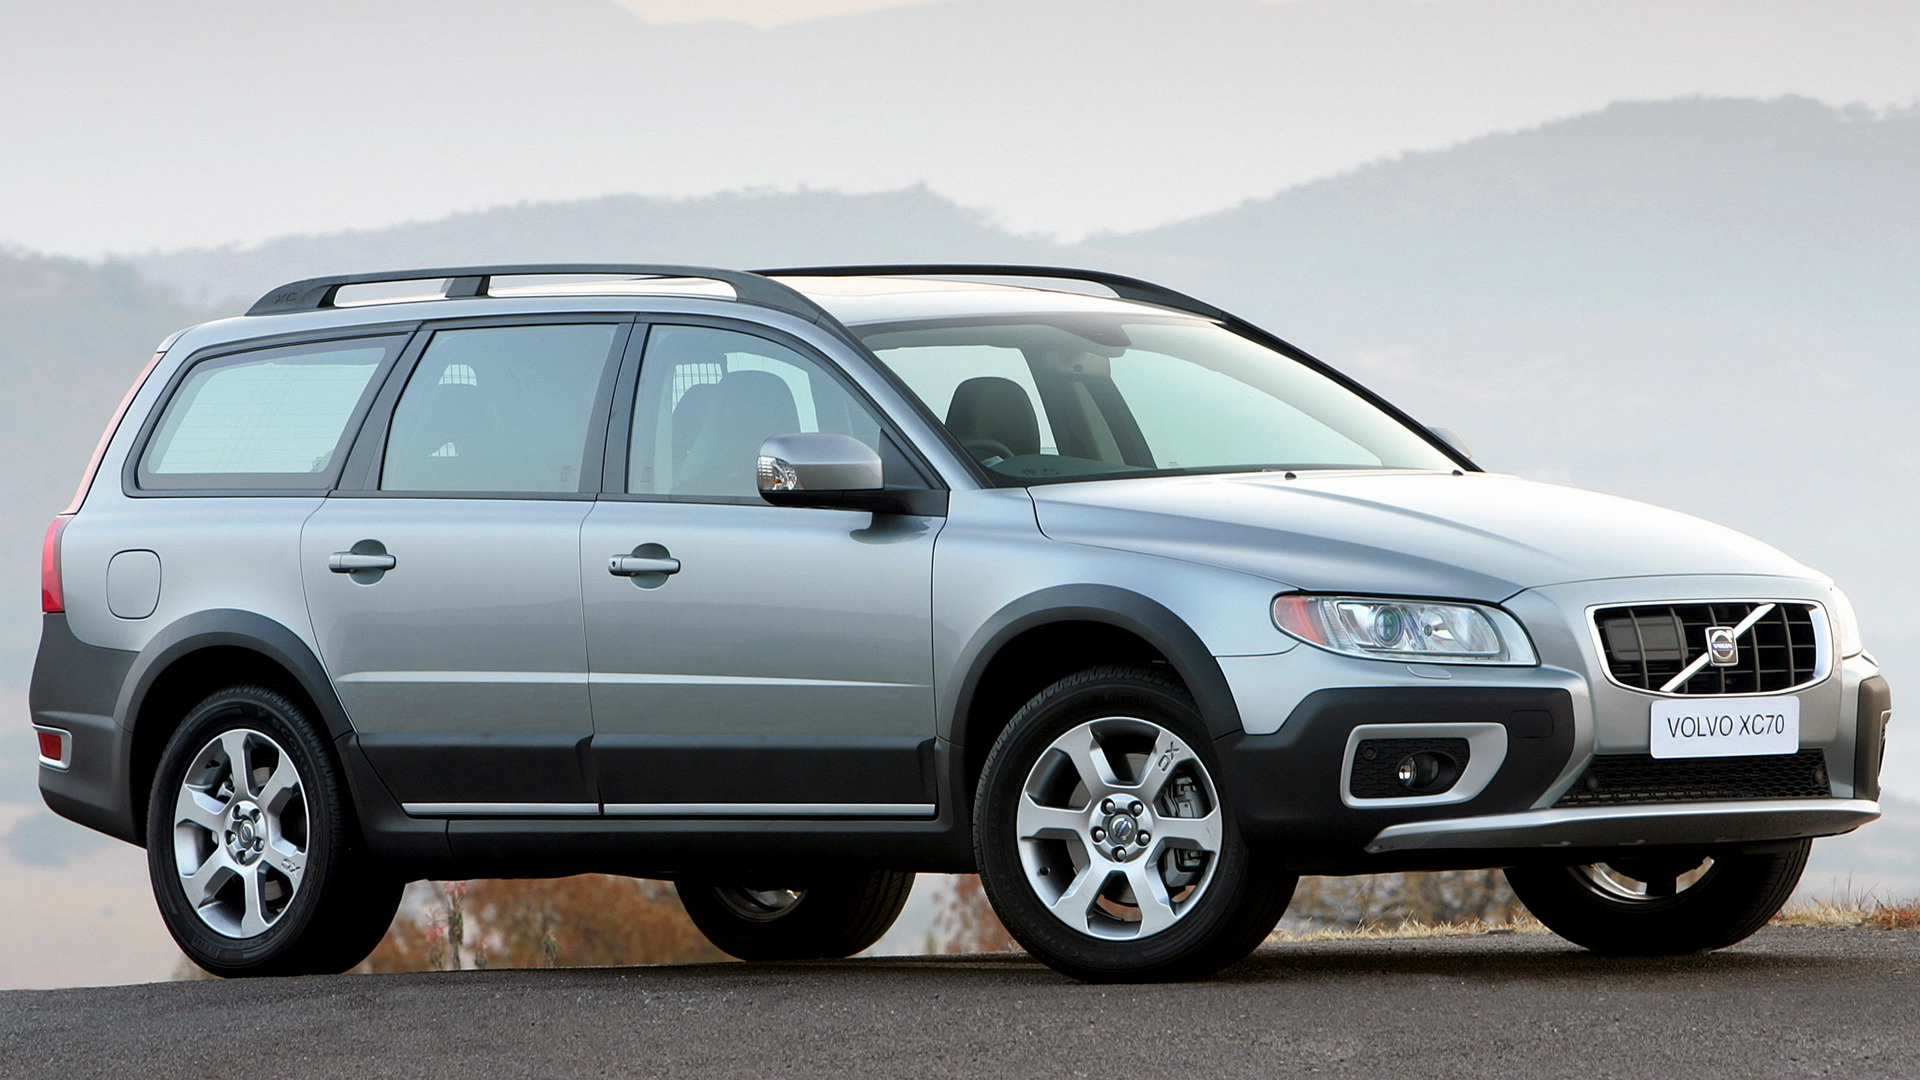 2007 Volvo XC70 (ZA) - Wallpapers and HD Images | Car Pixel